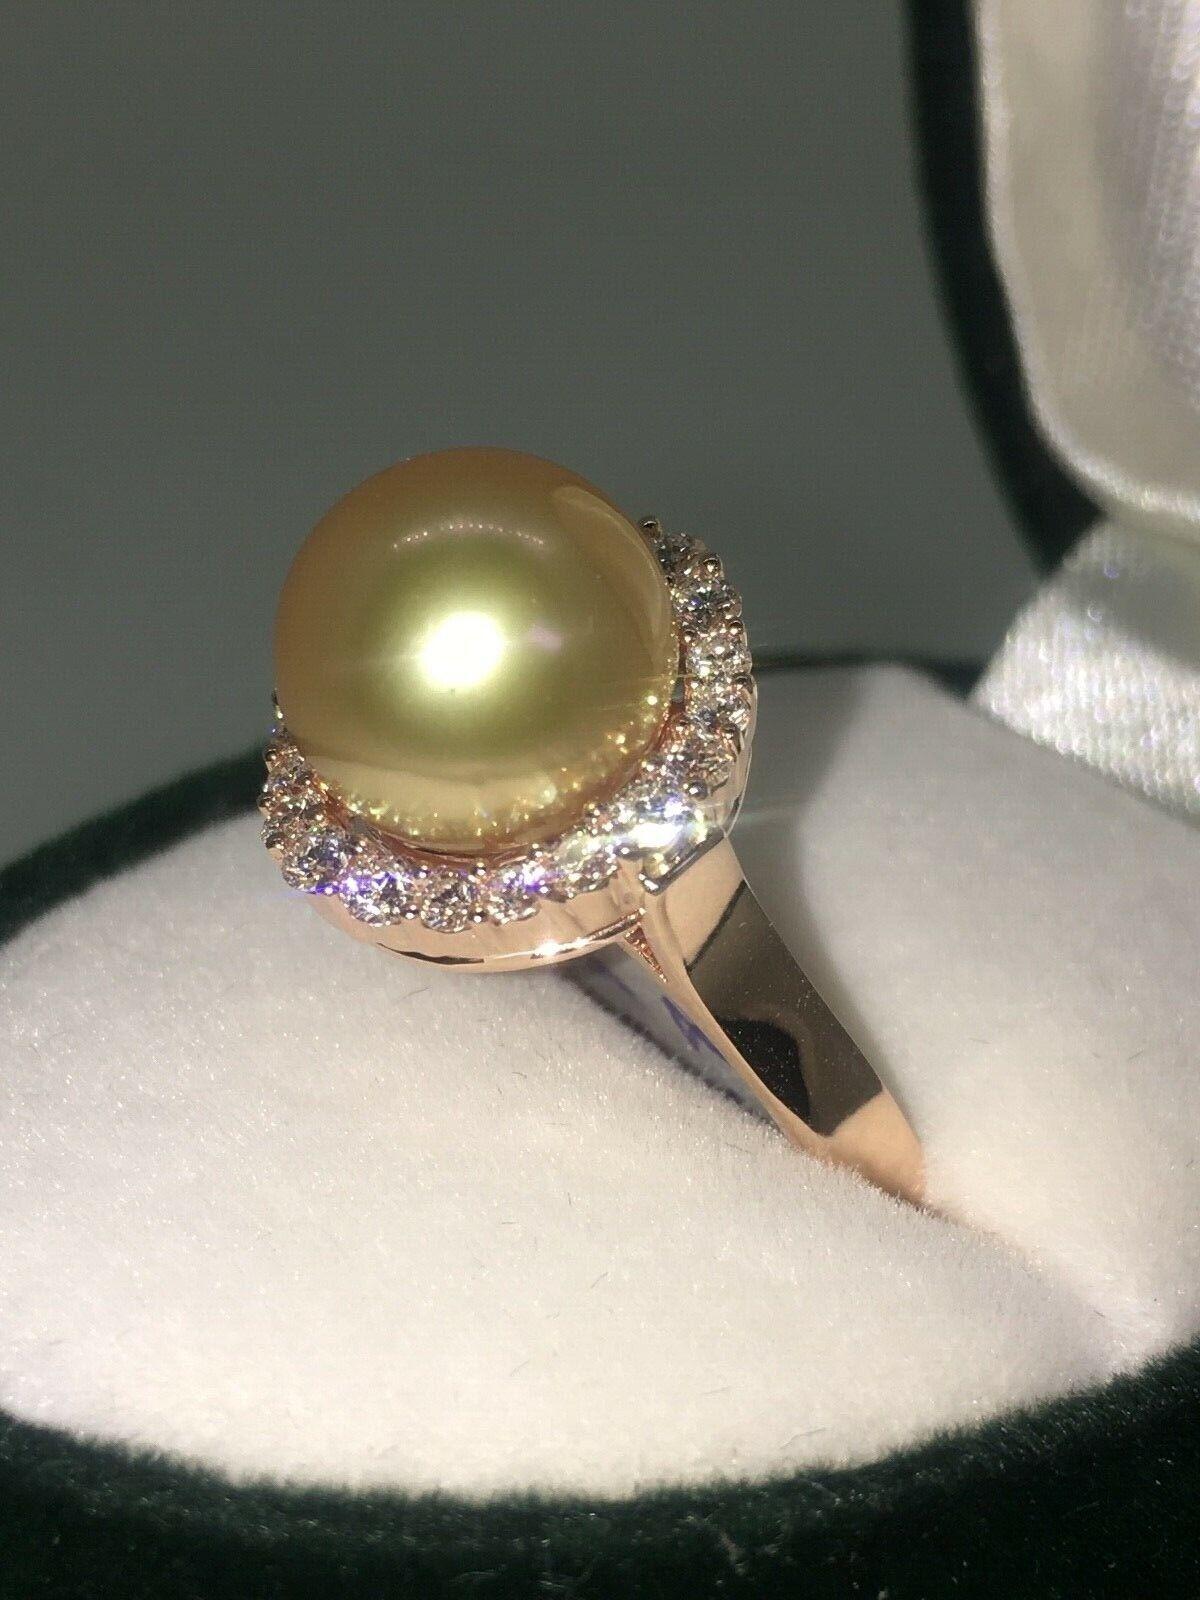 Centrally set with perfectly round South Sea Pearl of AAA quality, 
of Golden color & a very high, mirror-like luster
of 9.6mm 

Surrounded by the row of round brilliant cut diamonds (20) of E color, VVS clarity 
of 1.10ct in total approx. 

Mounted